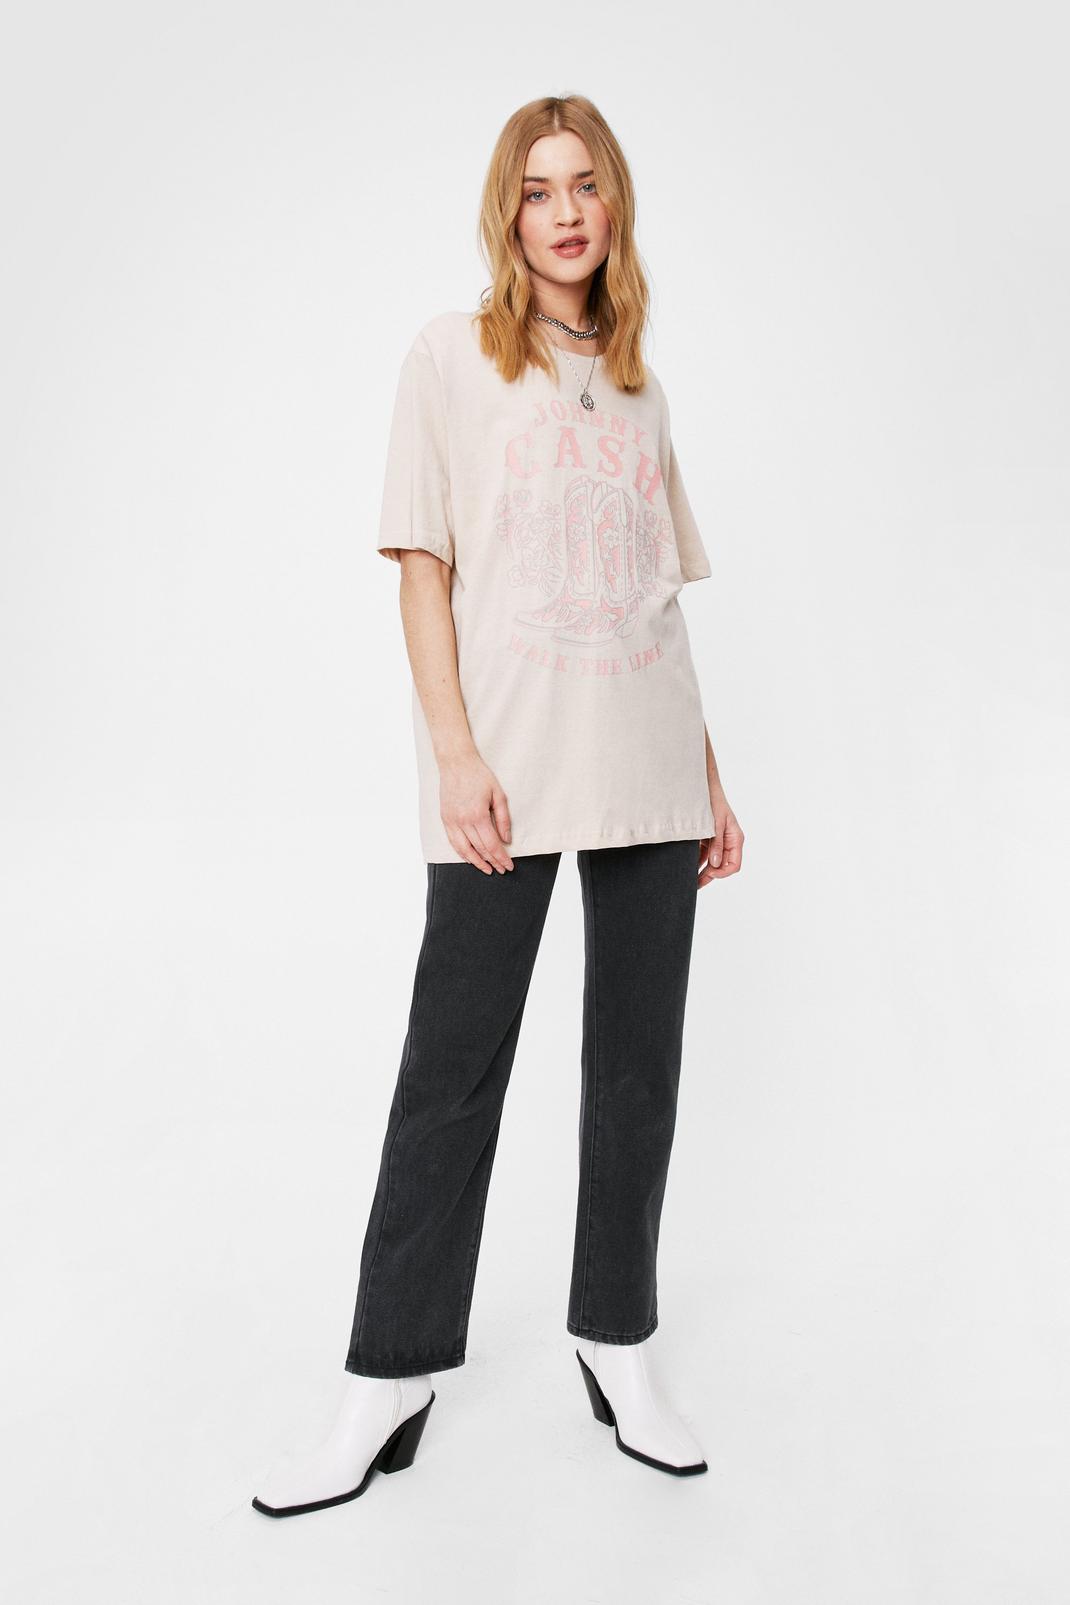 Johnny Cash Walk the Line Oversized Graphic T-Shirt | Nasty Gal